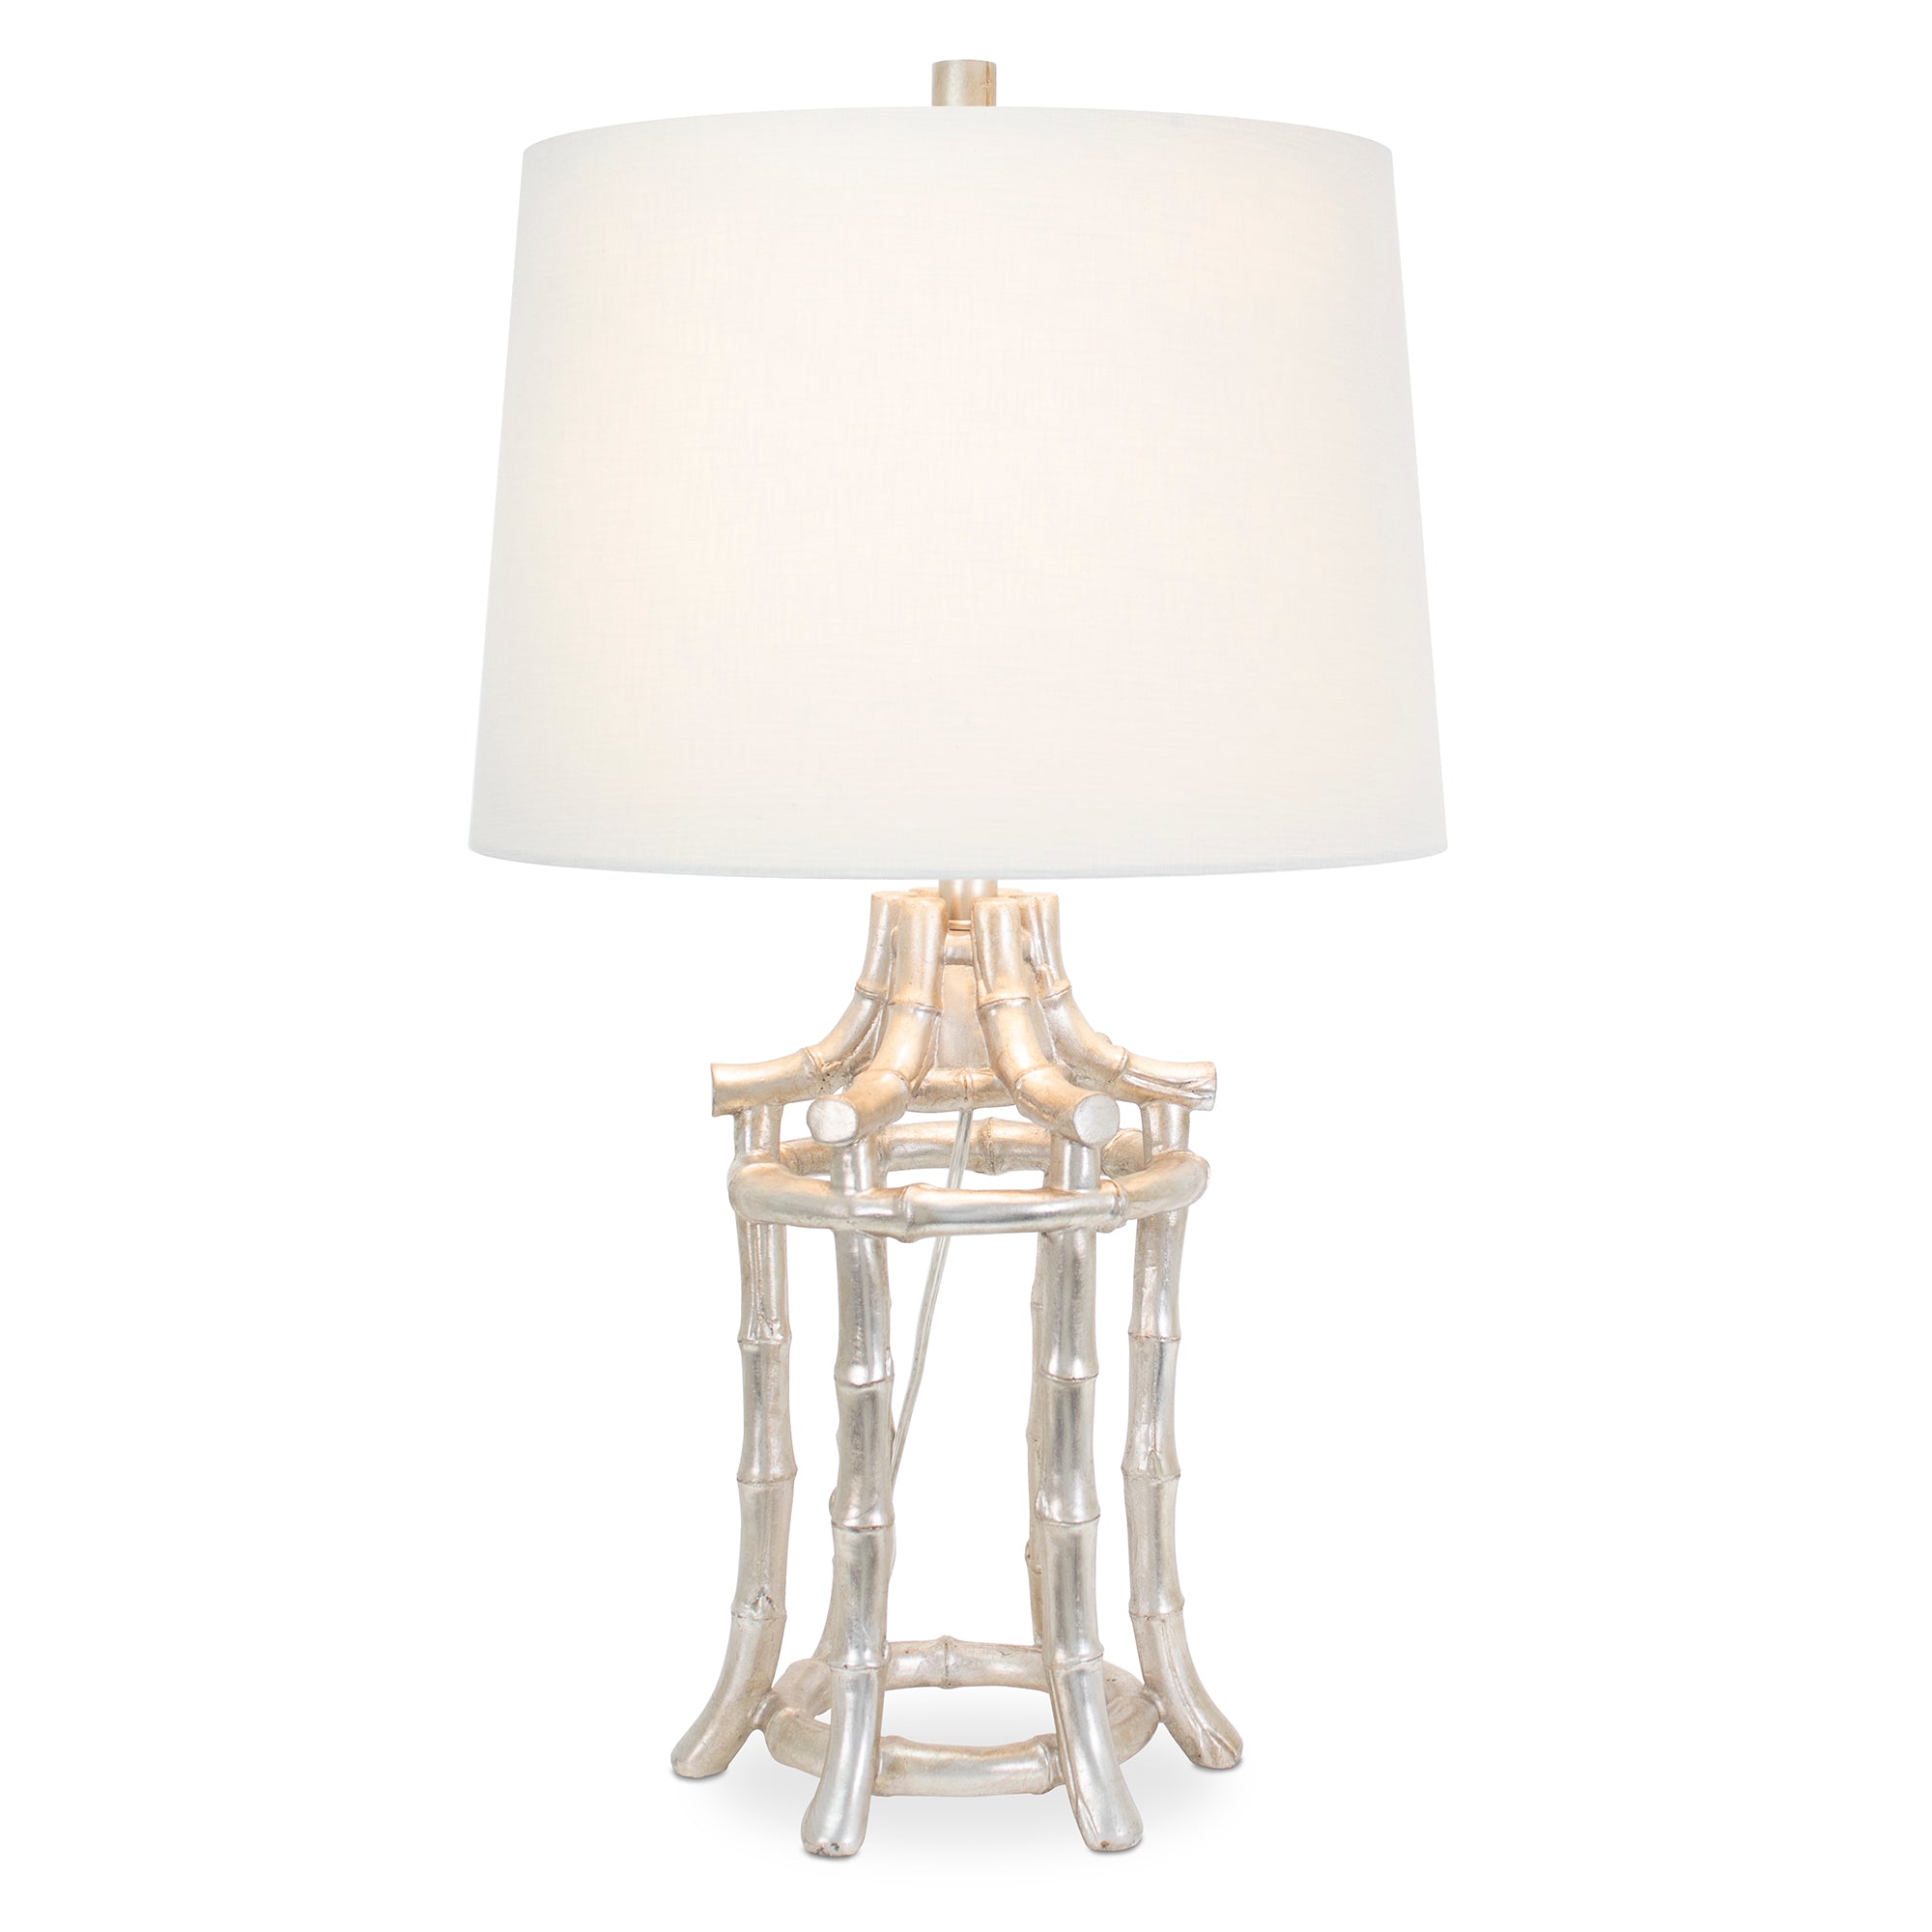 Bamboo Table Lamp, Silver - Couture Lamps